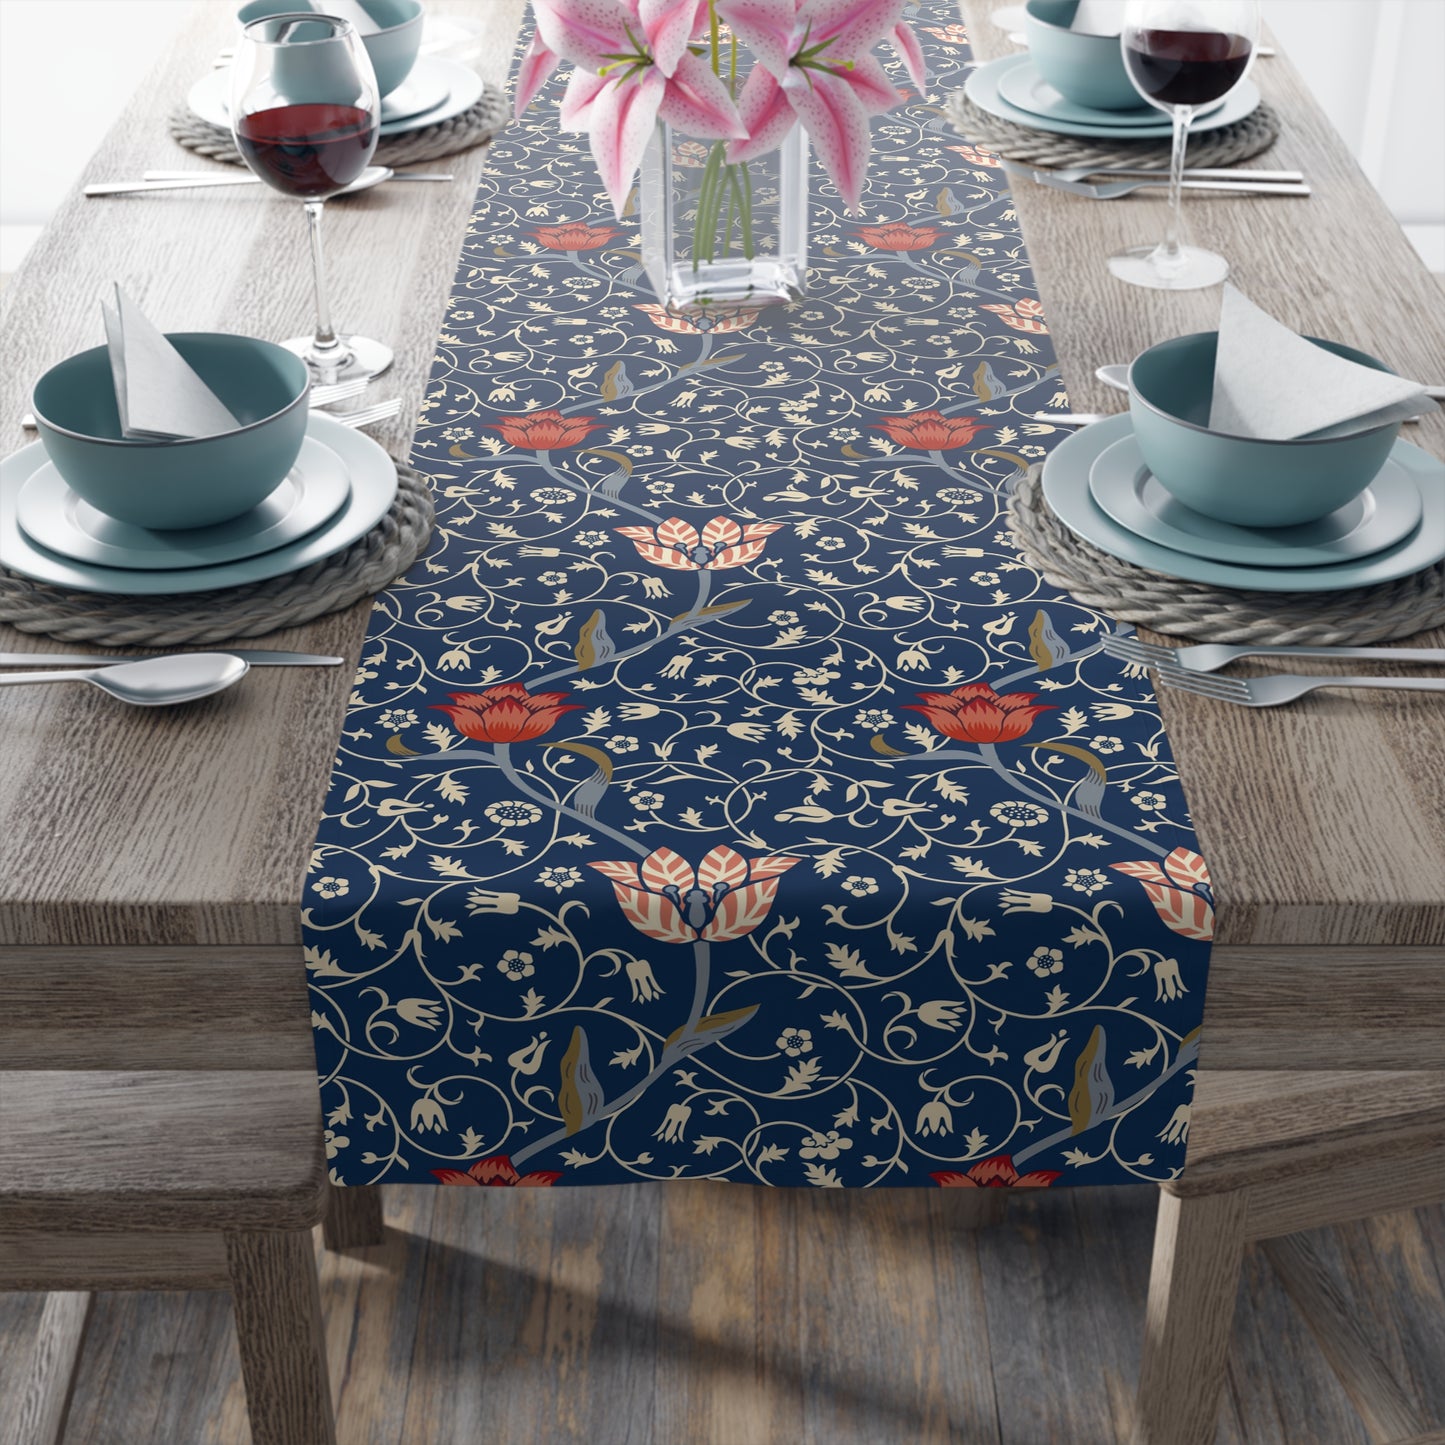 william-morris-co-table-runner-medway-collection-8